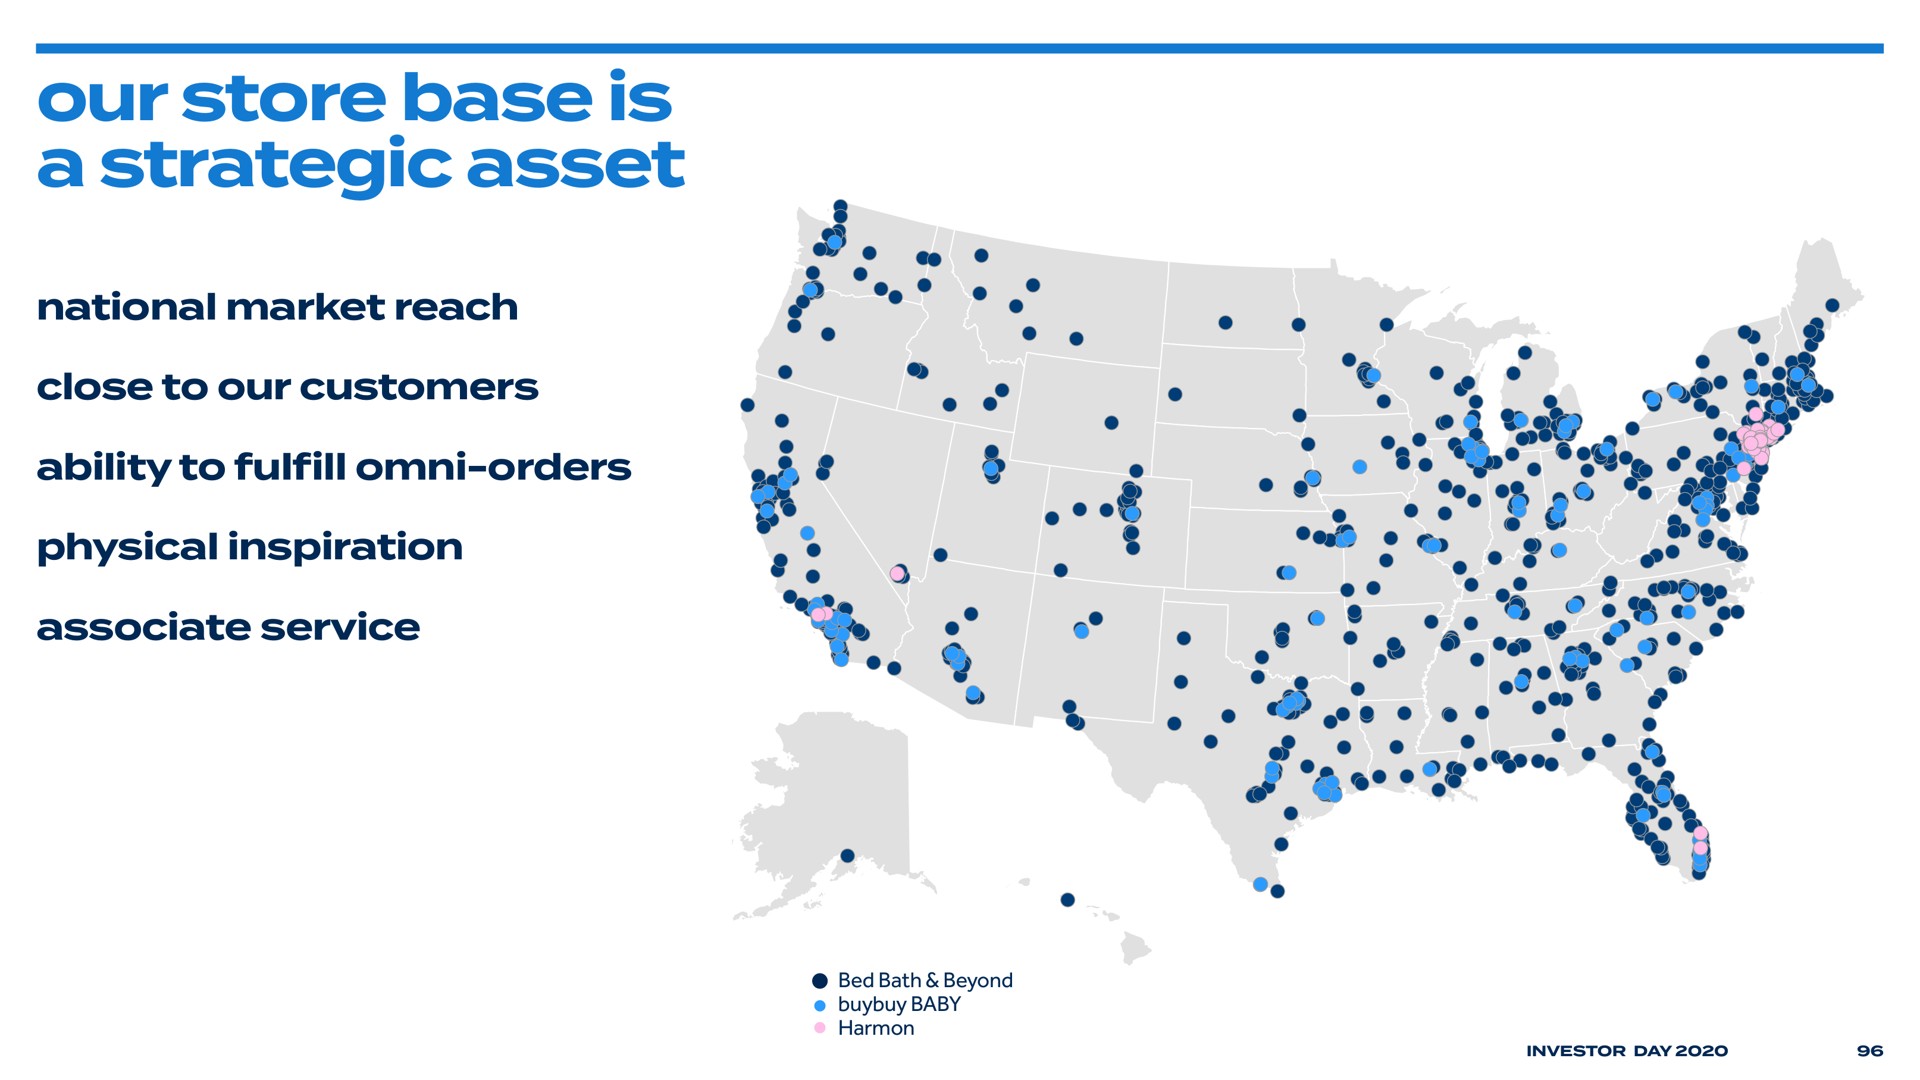 our store base is a strategic asset | Bed Bath & Beyond